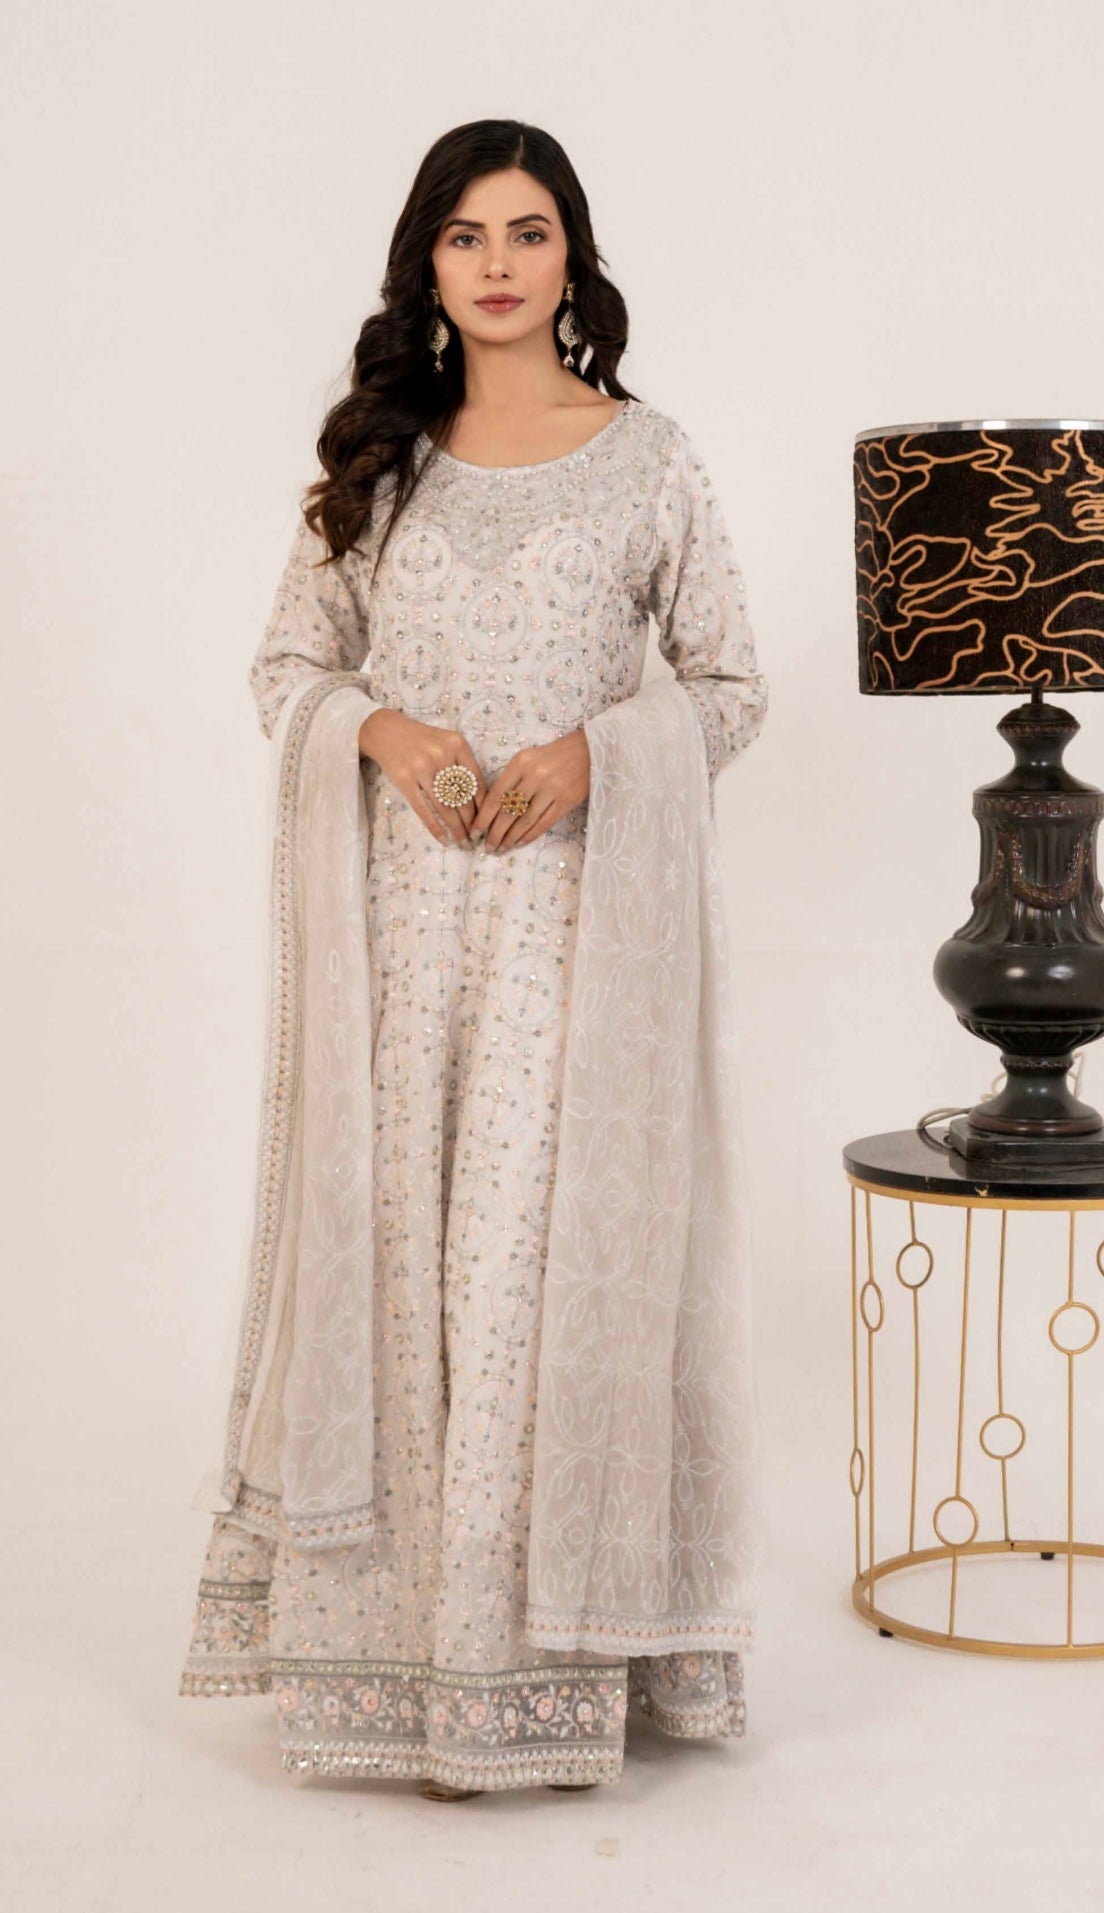 SIMRANS Shahjahan 3 piece embroidered chiffon long style dress -3527